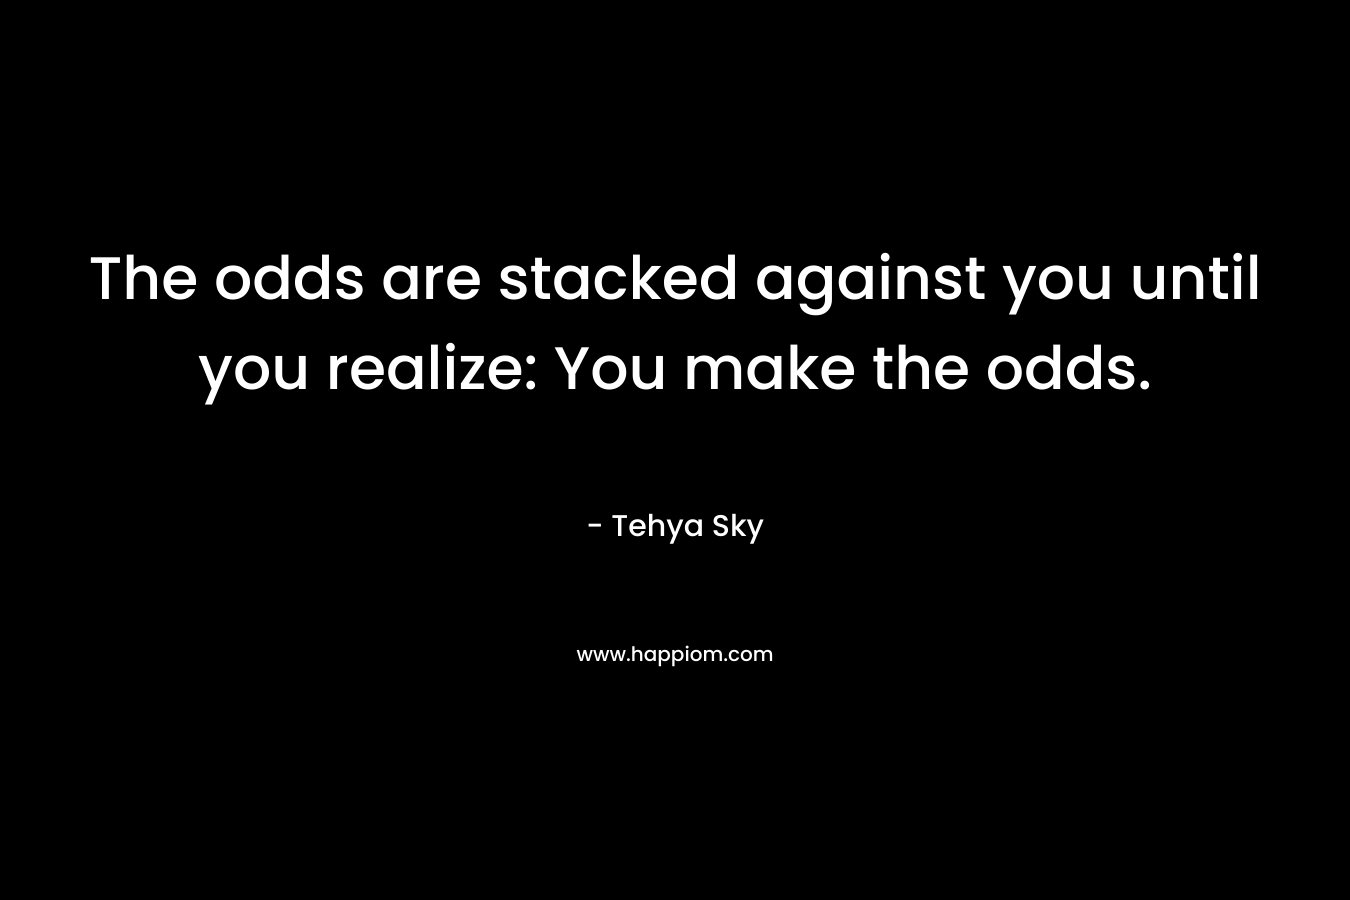 The odds are stacked against you until you realize: You make the odds. – Tehya Sky